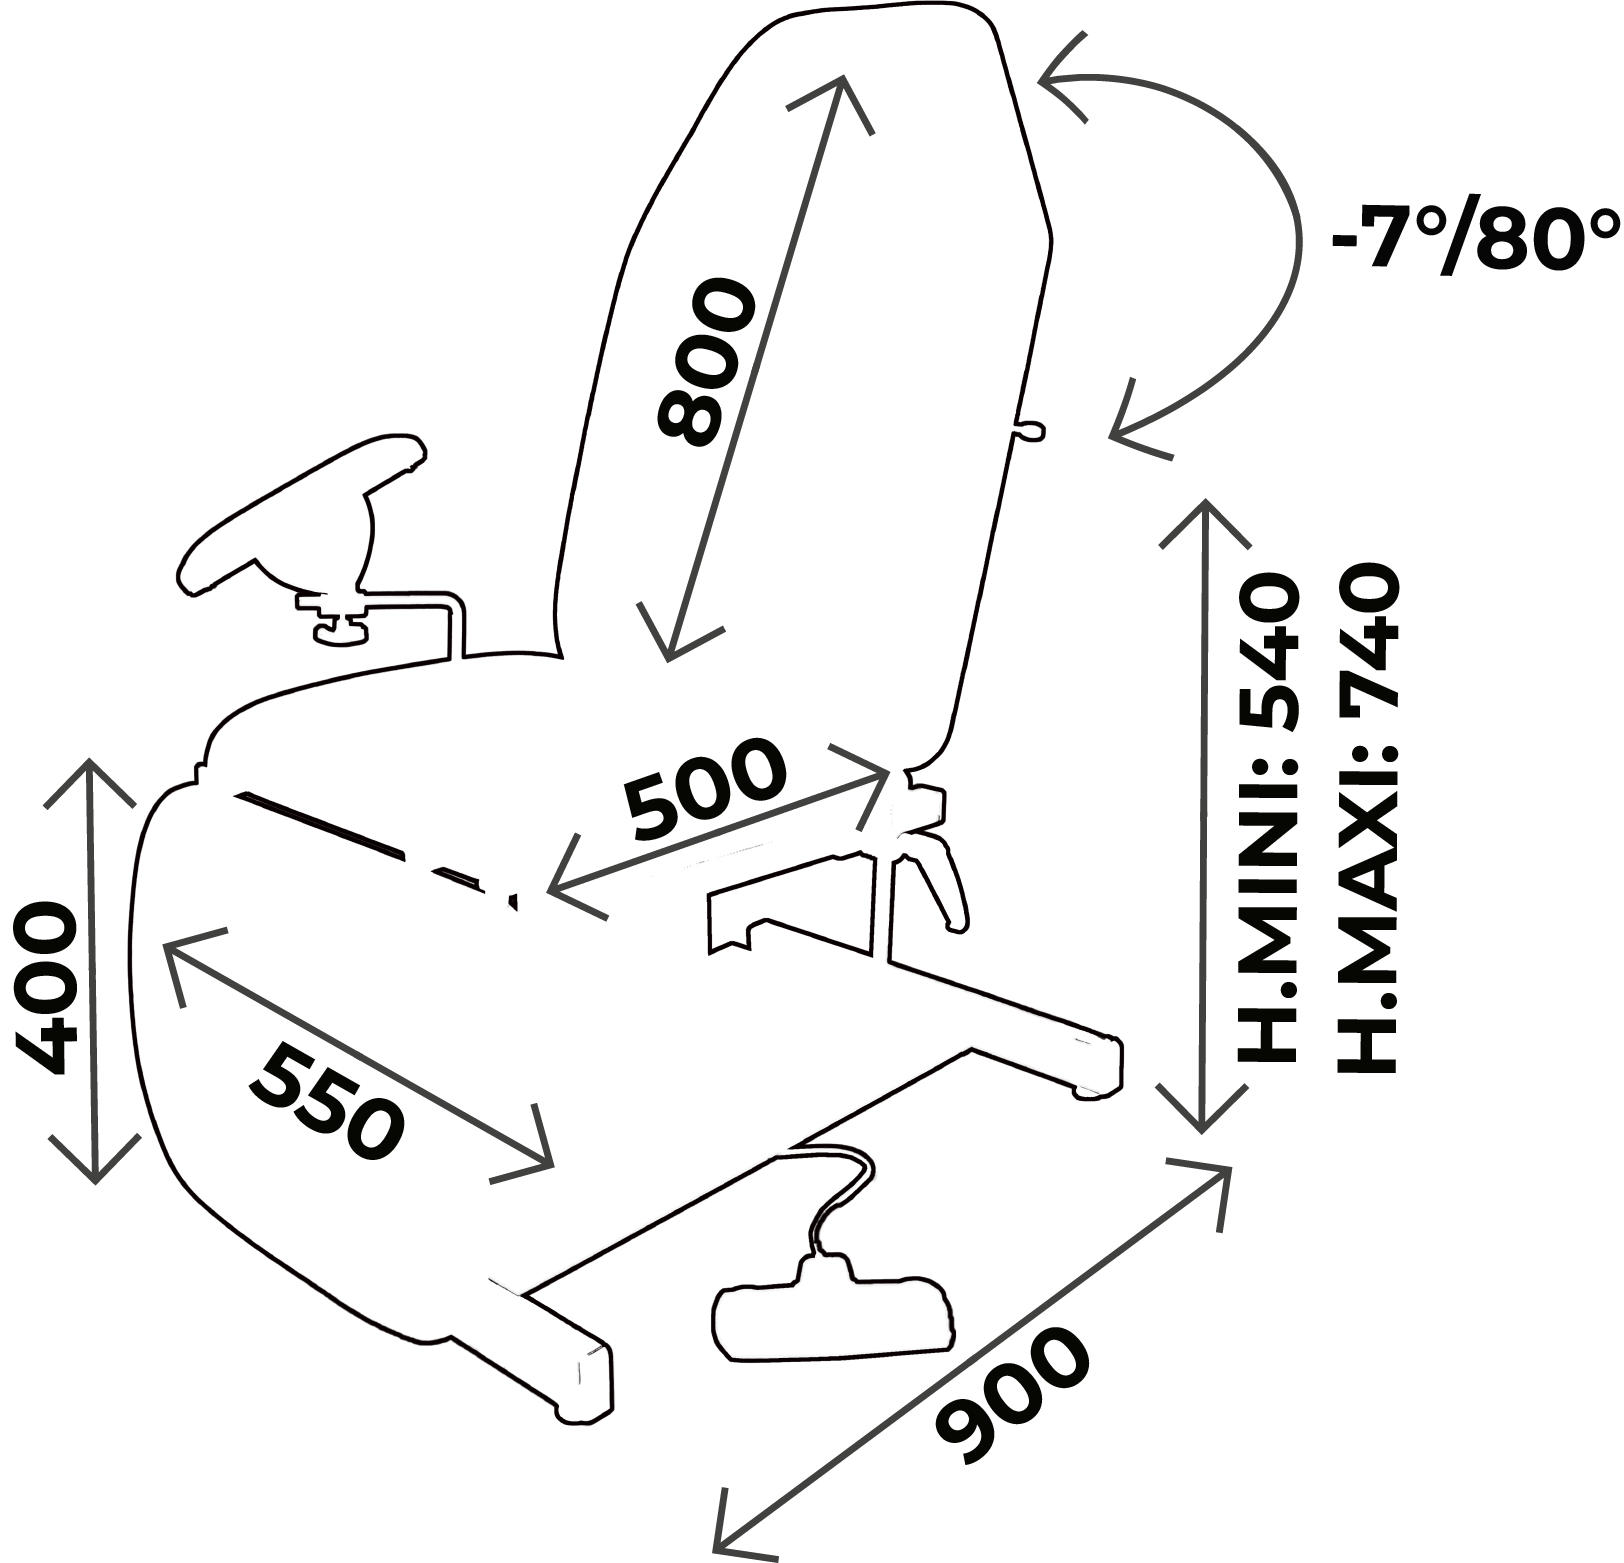 Electric blood chair 3 sections, non-rotative, with blood test splints